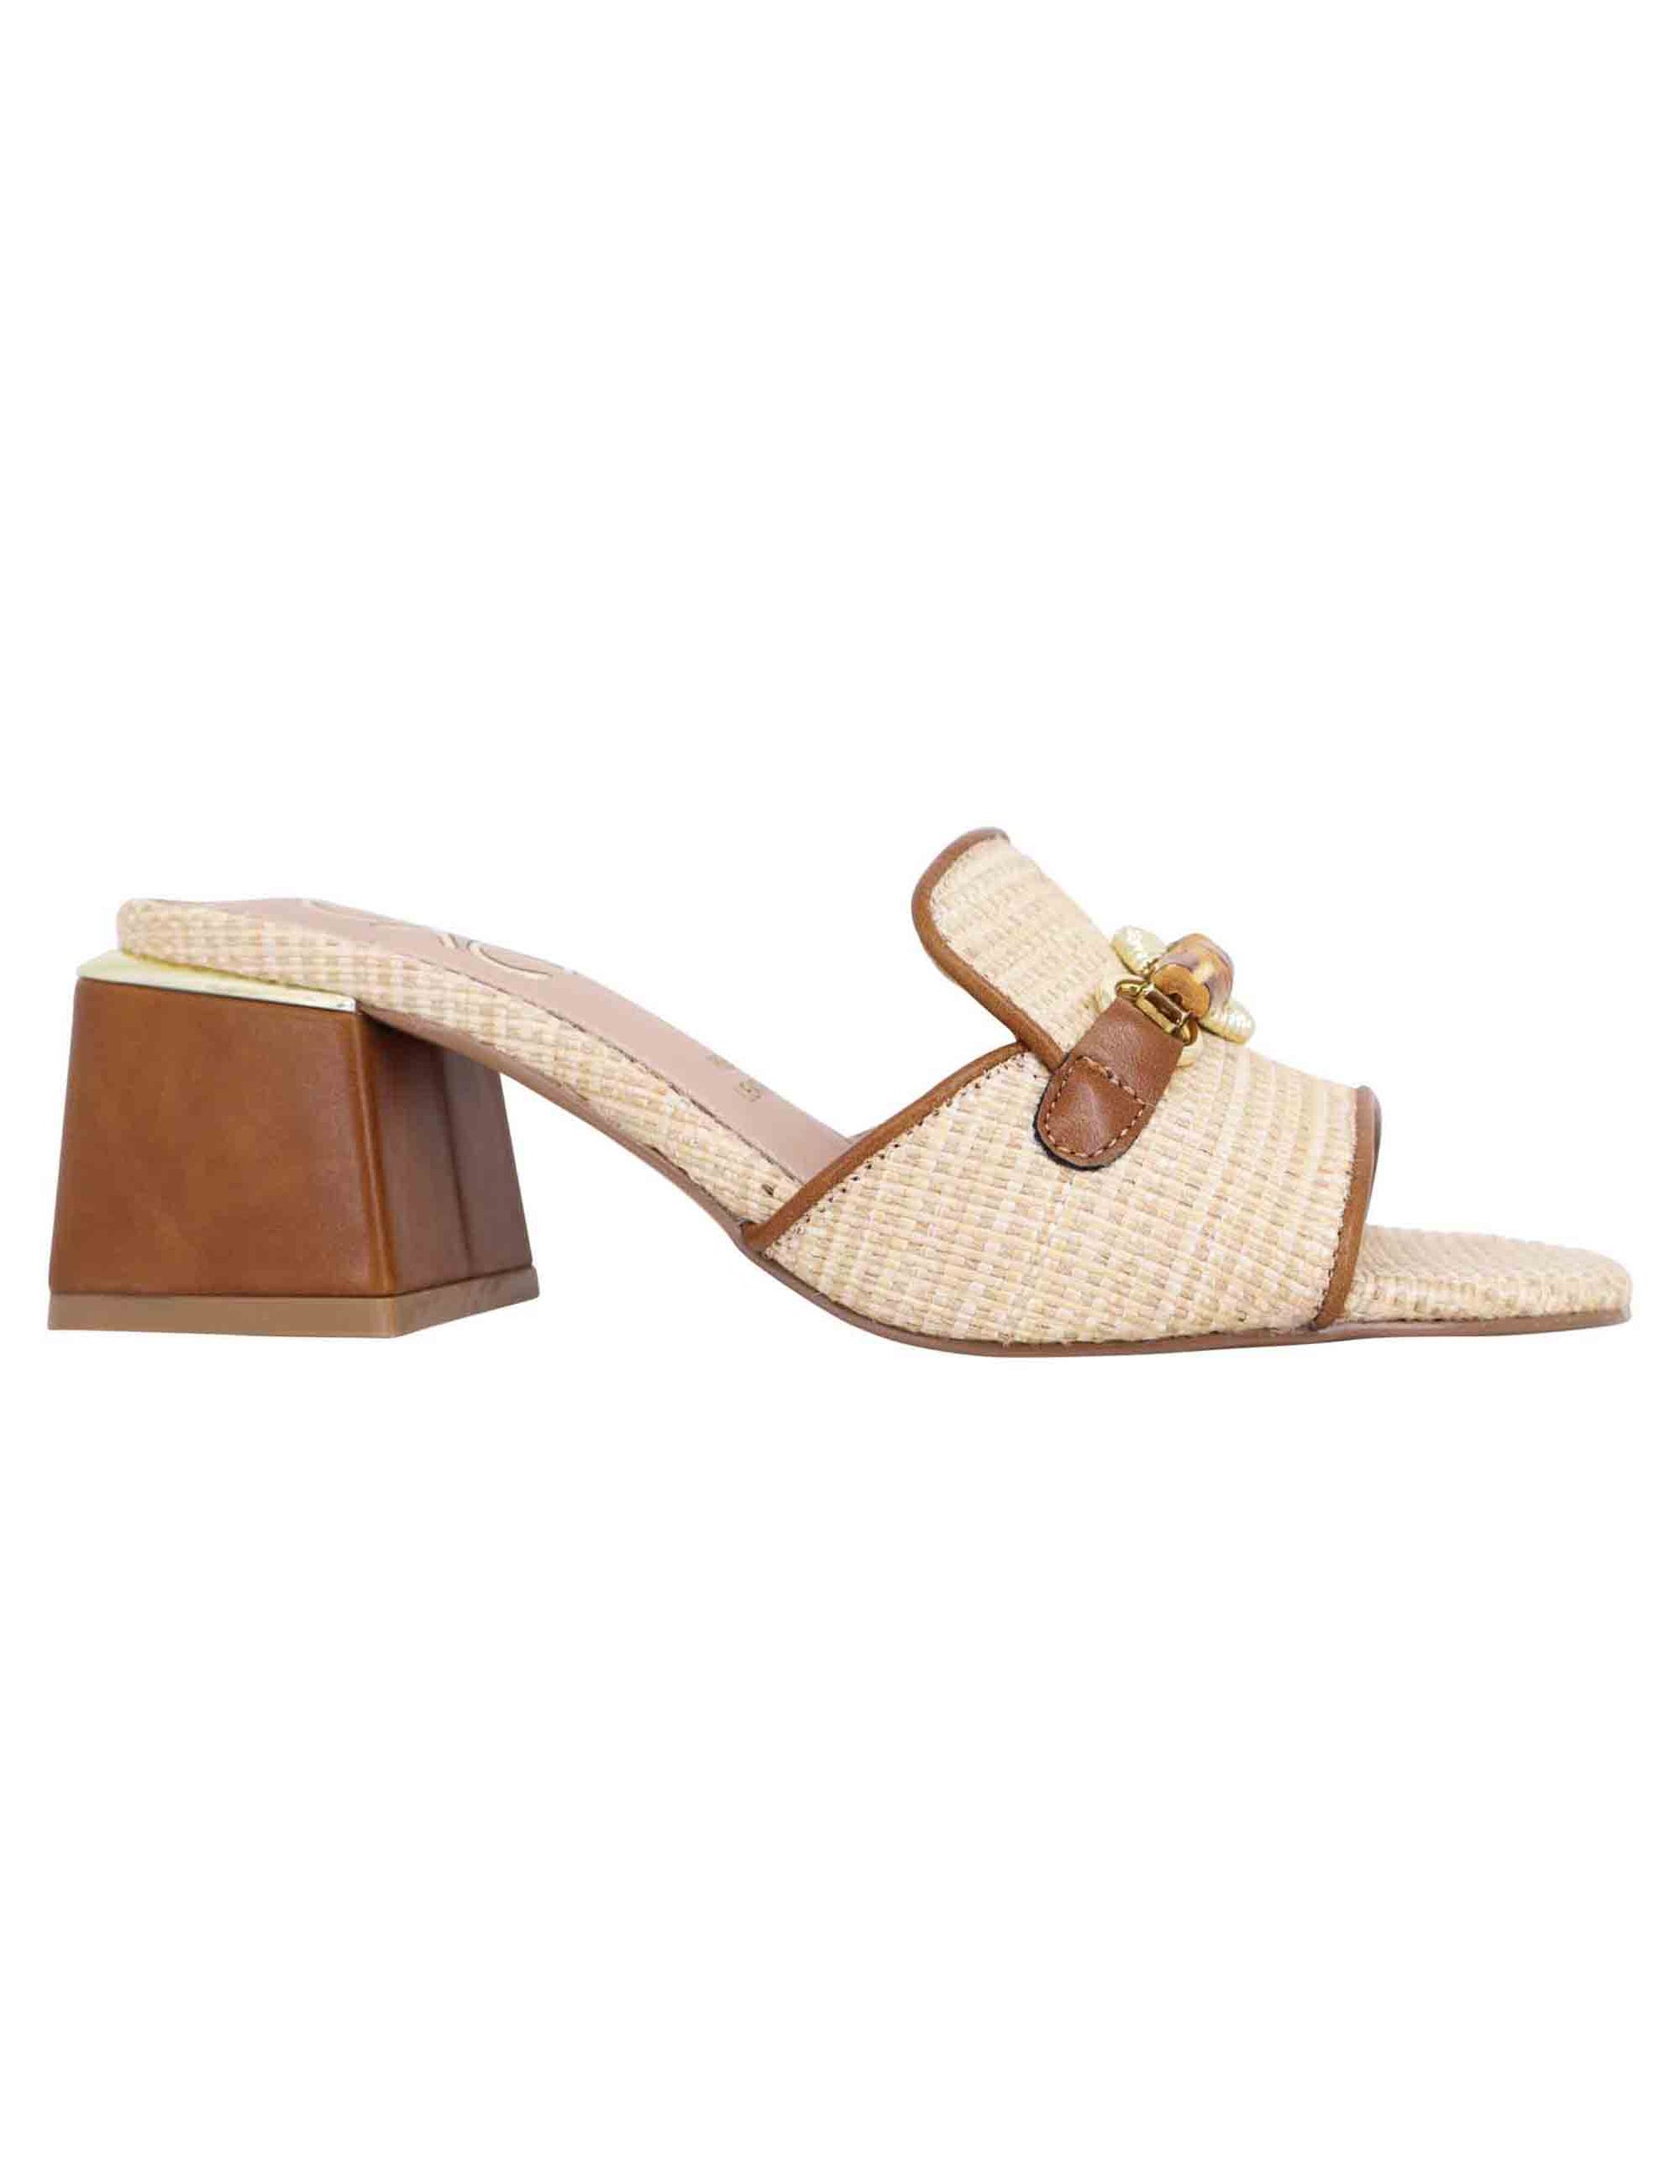 Women's sandals in beige fabric and leather with clamp